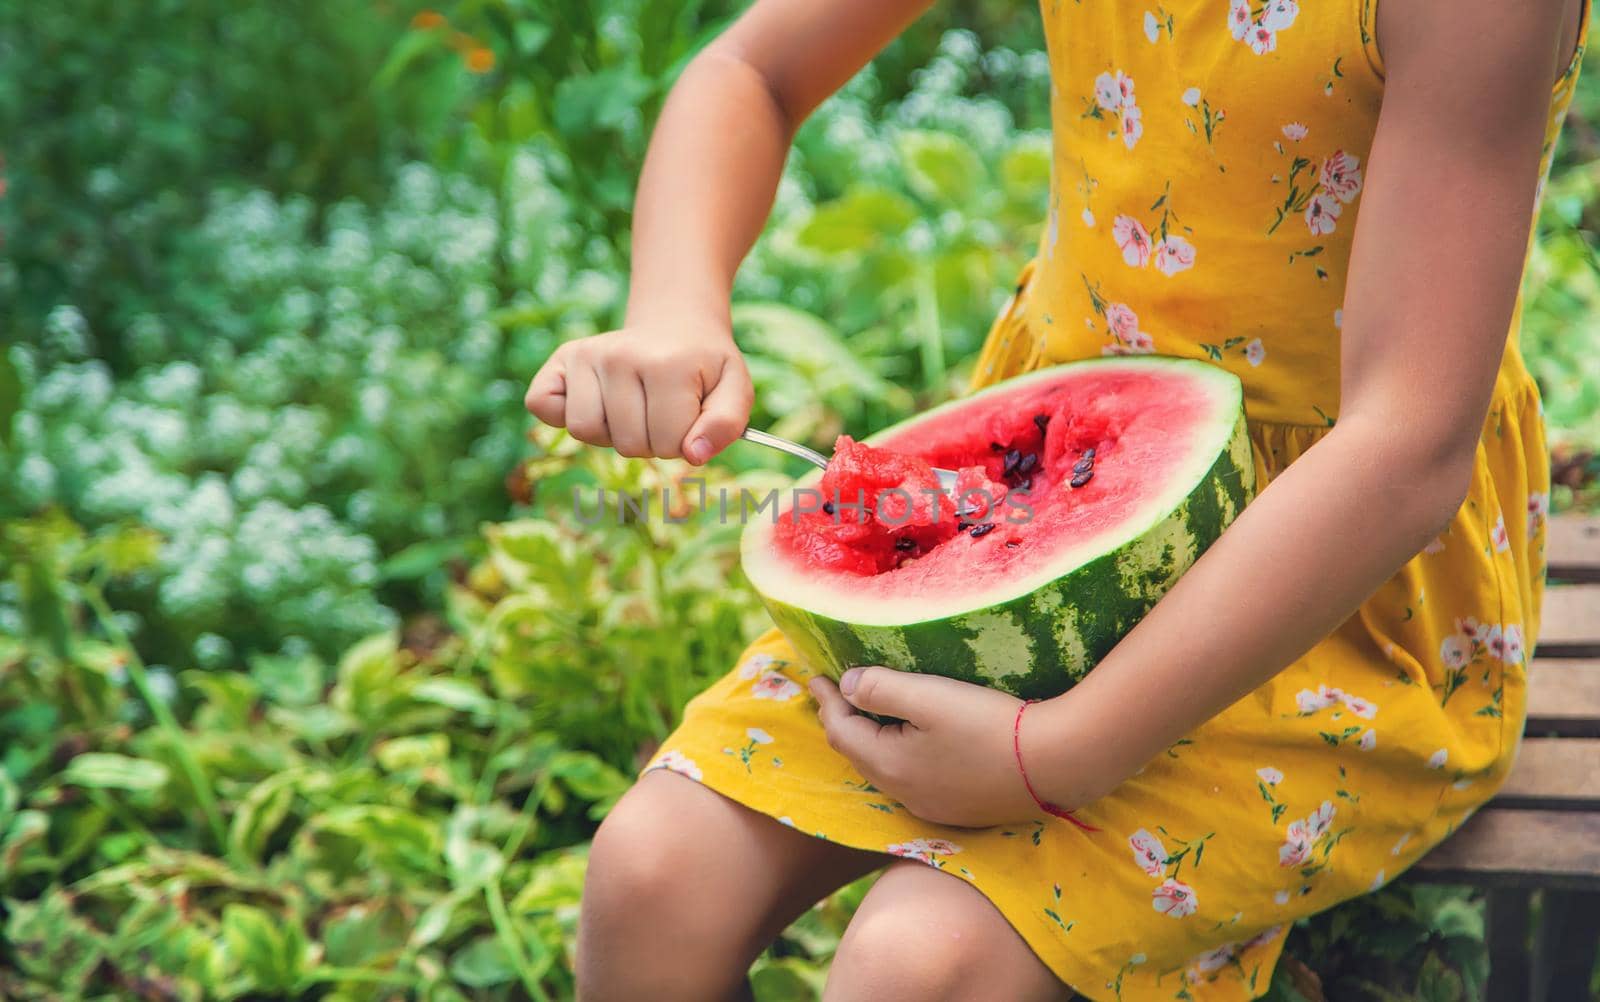 The child eats a watermelon with a spoon. Selective focus. by yanadjana